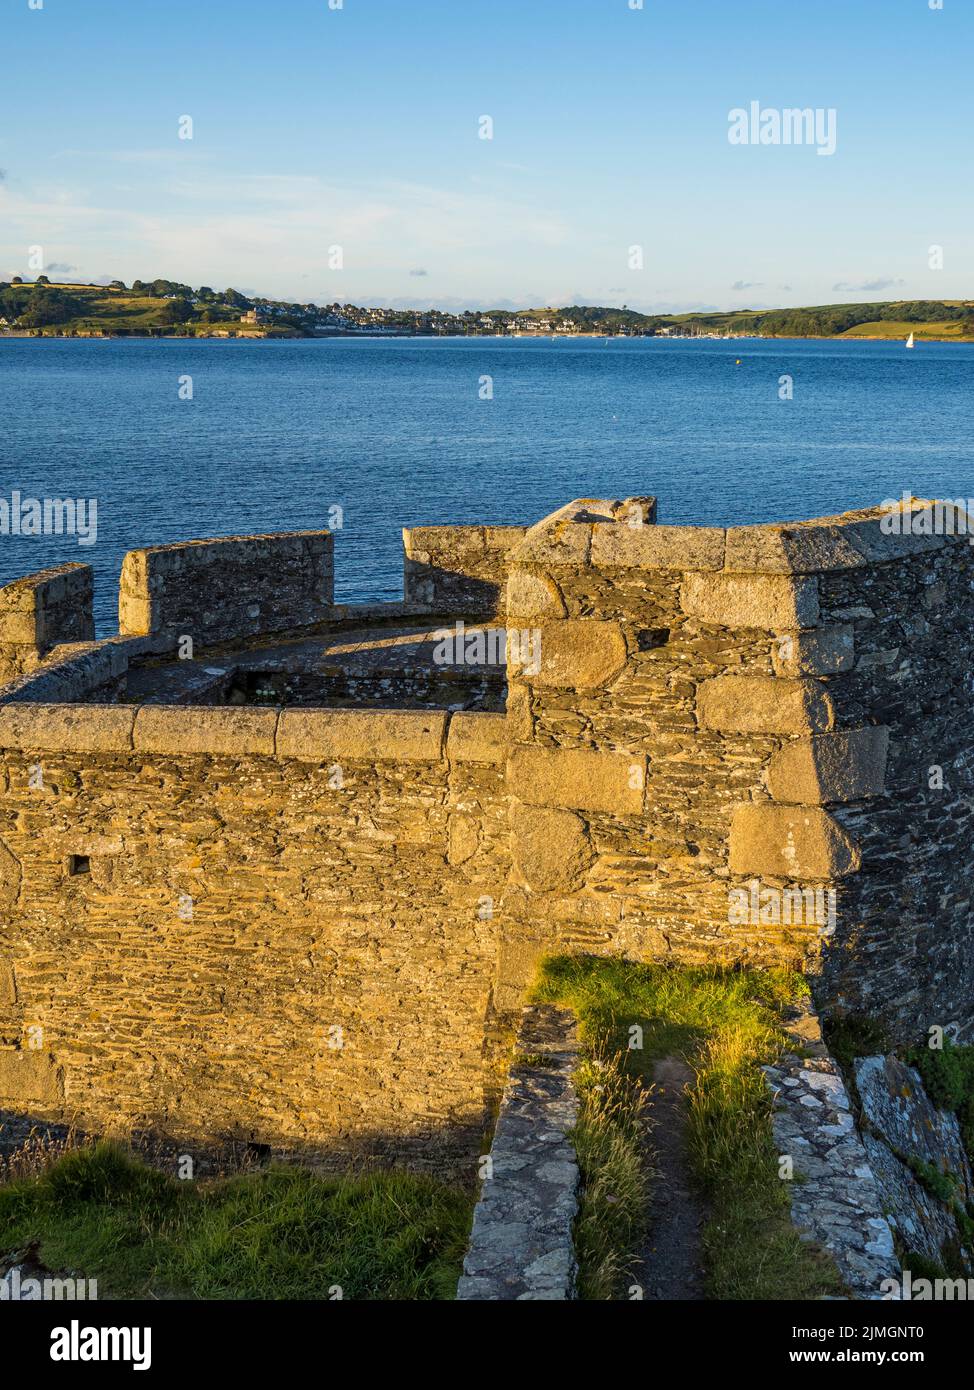 Fort Little Dennis, Pendennis point, Falmouth, Angleterre, Royaume-Uni. Banque D'Images